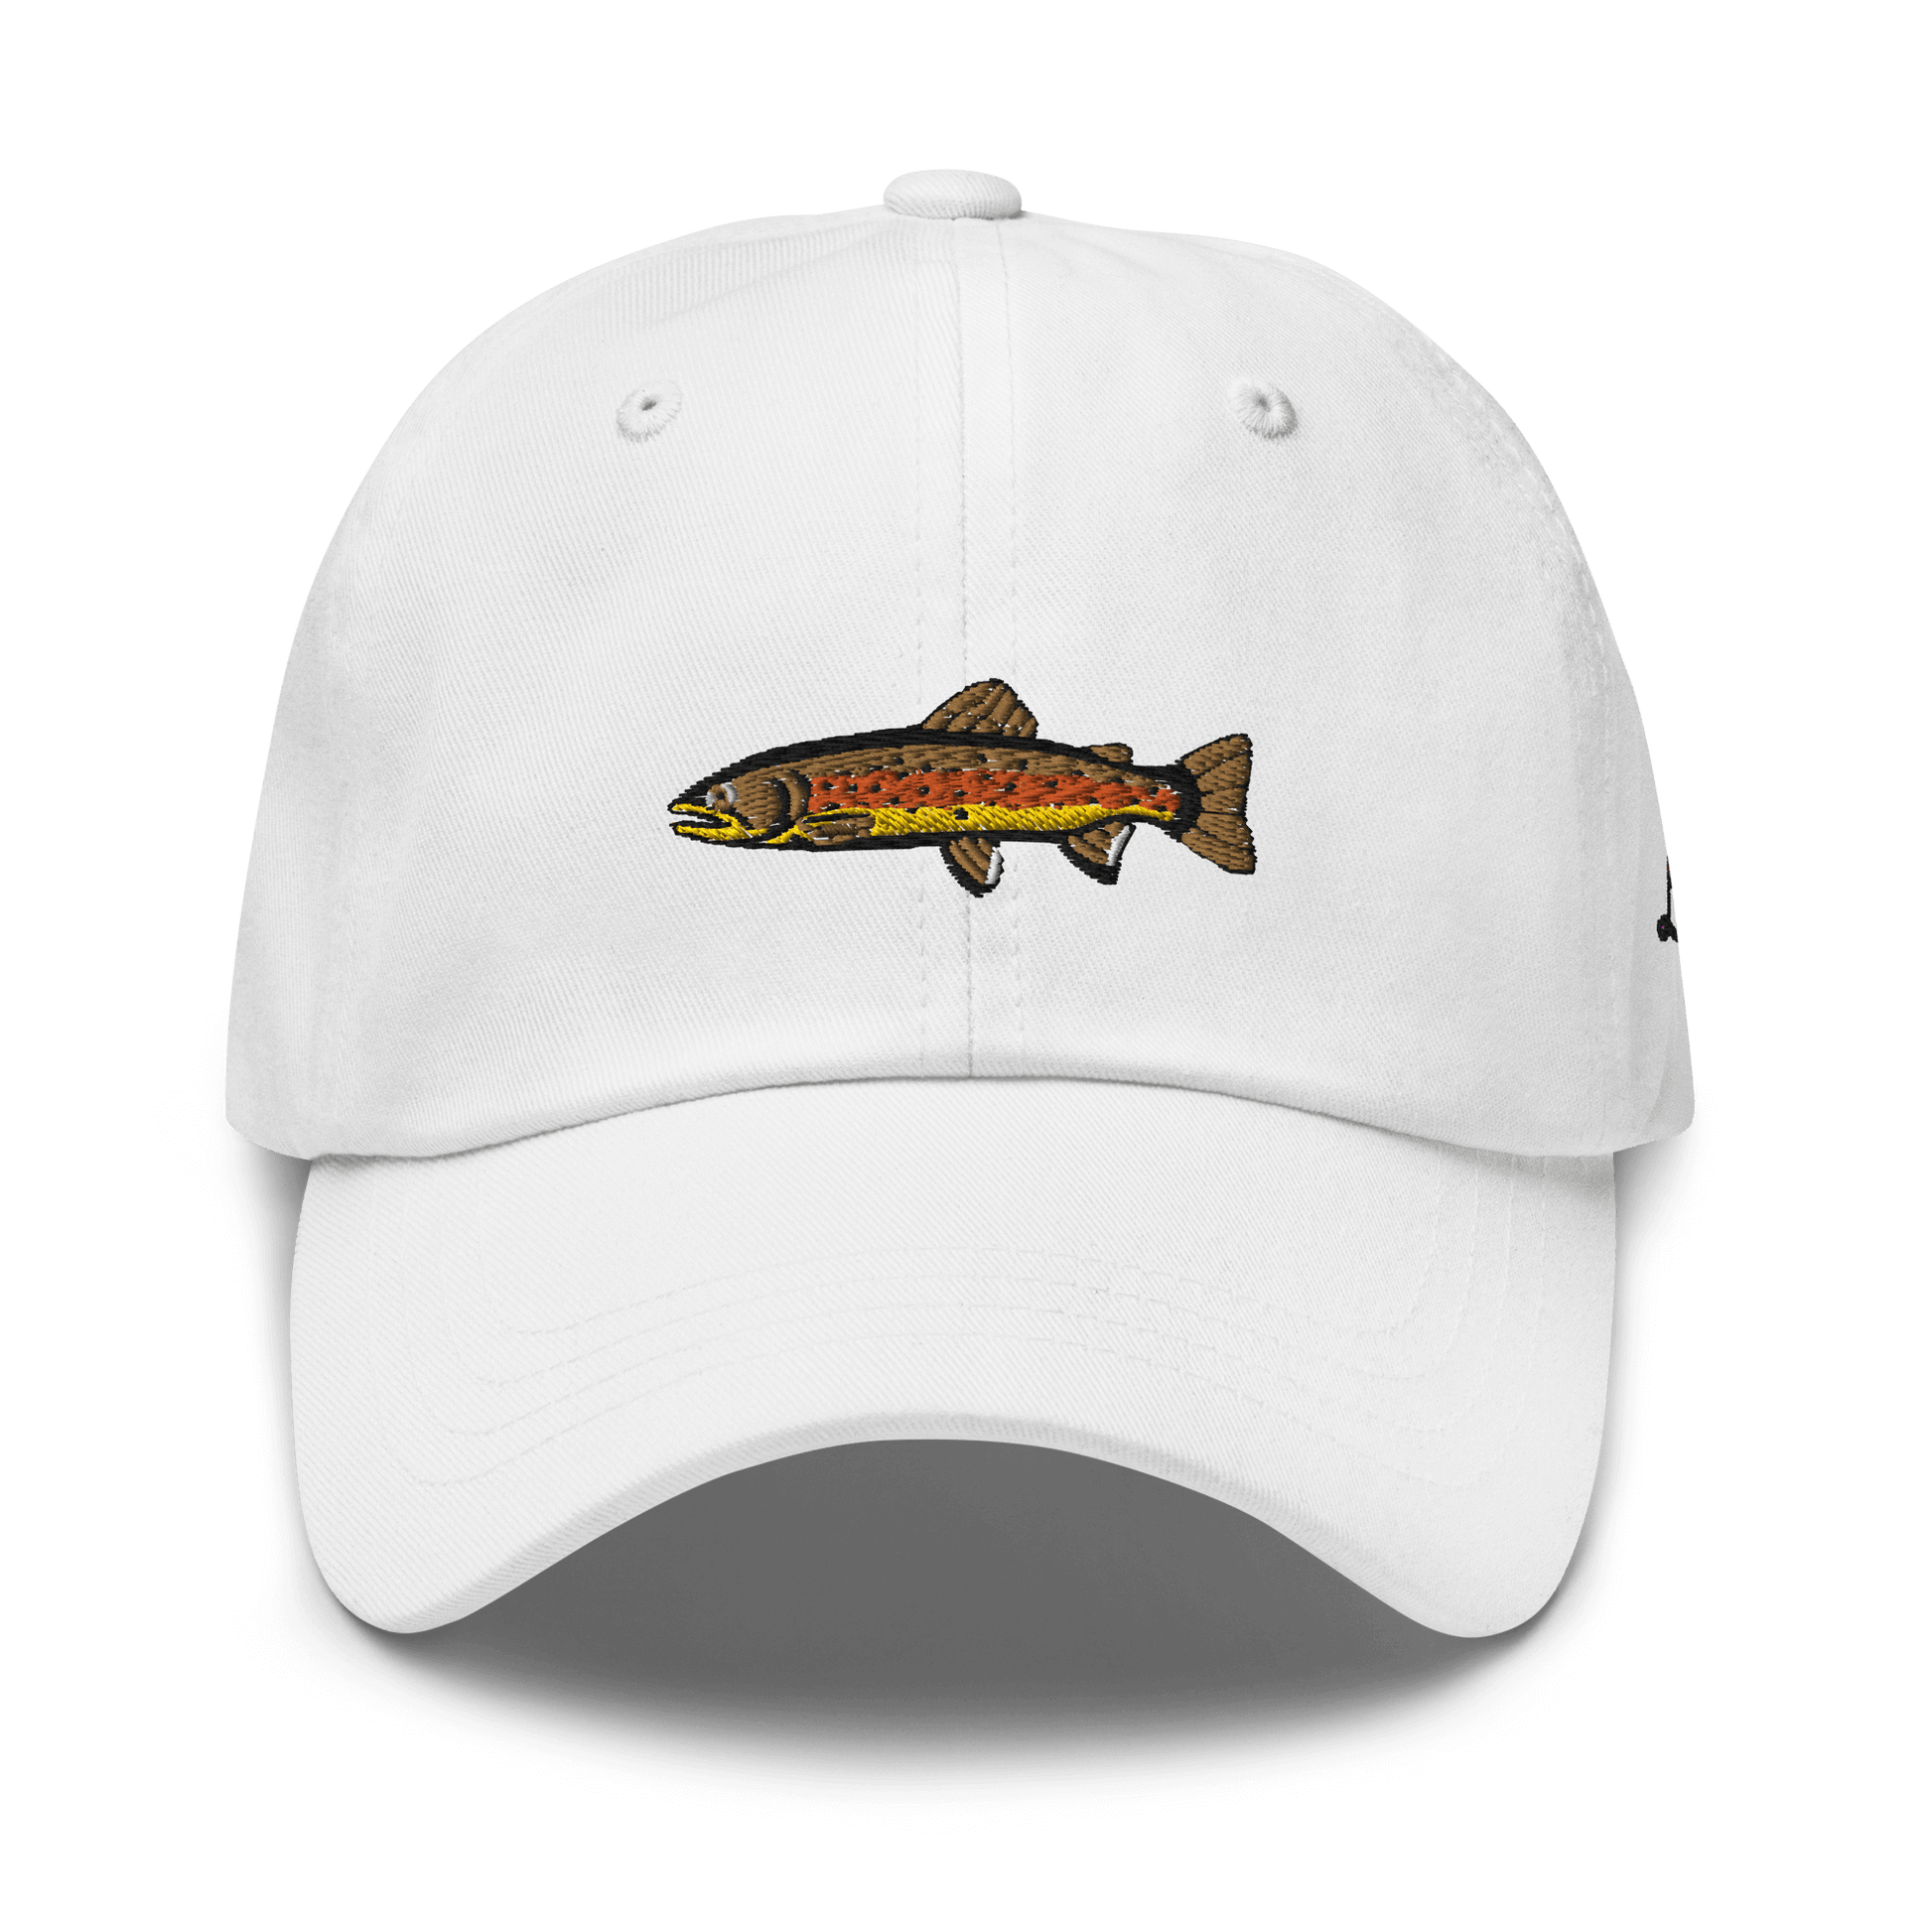 Vintage Trout Lodge Embroidered Fishing Snapback Hat Cap Made In The USA 